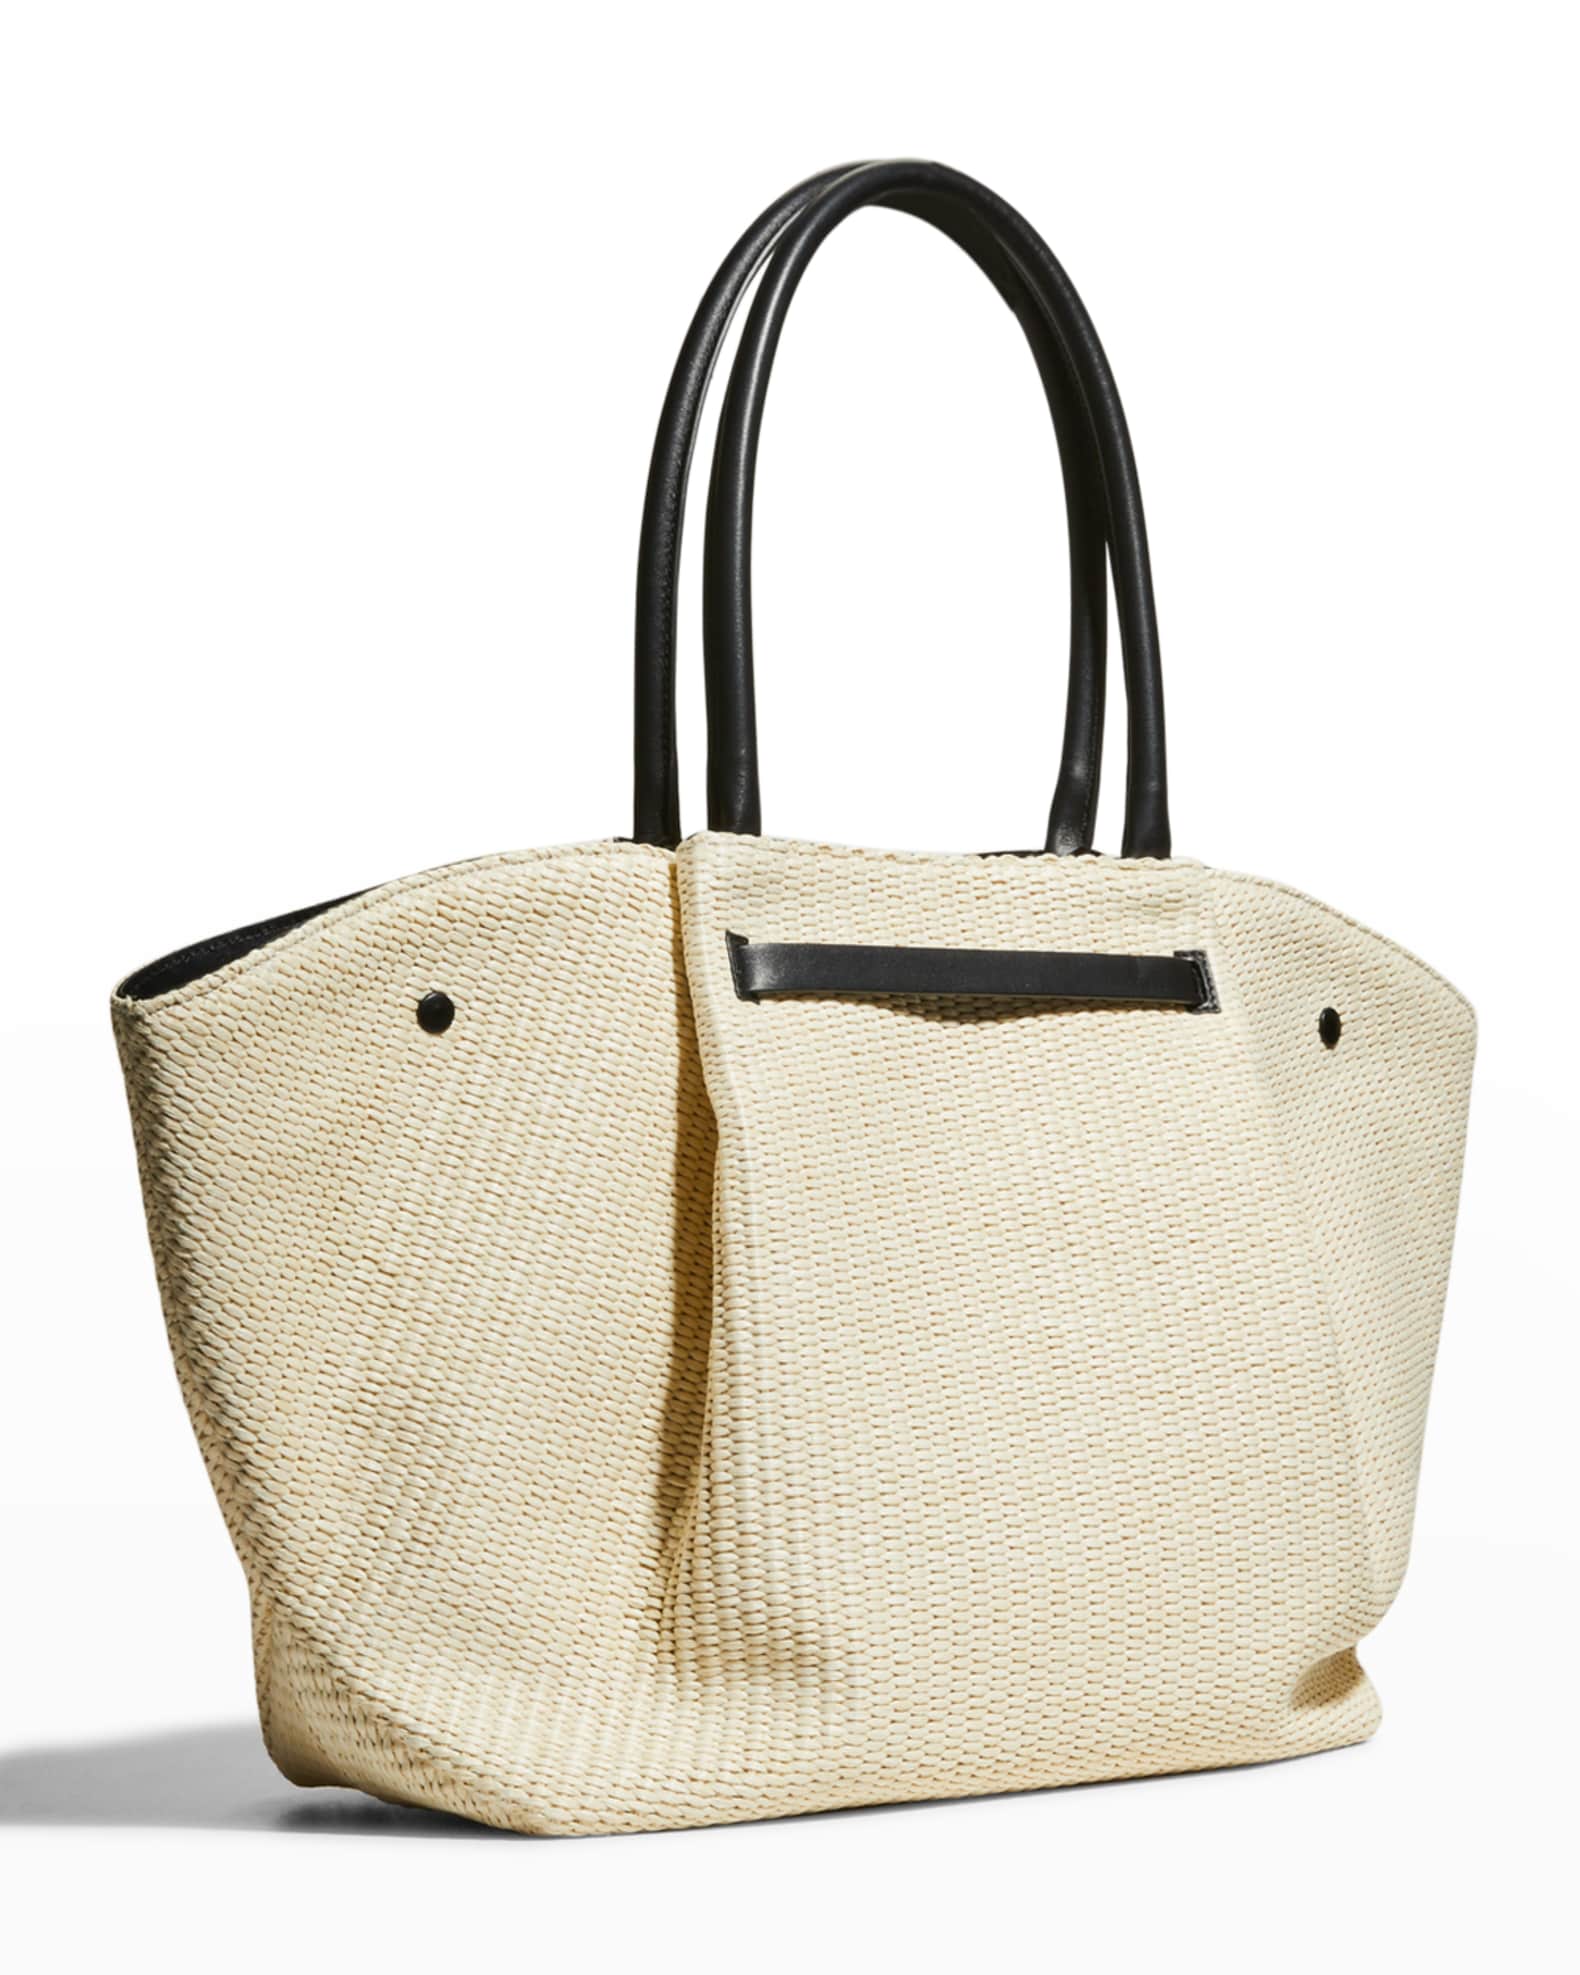 DeMellier New York Calf Leather Tote Bag | Neiman Marcus